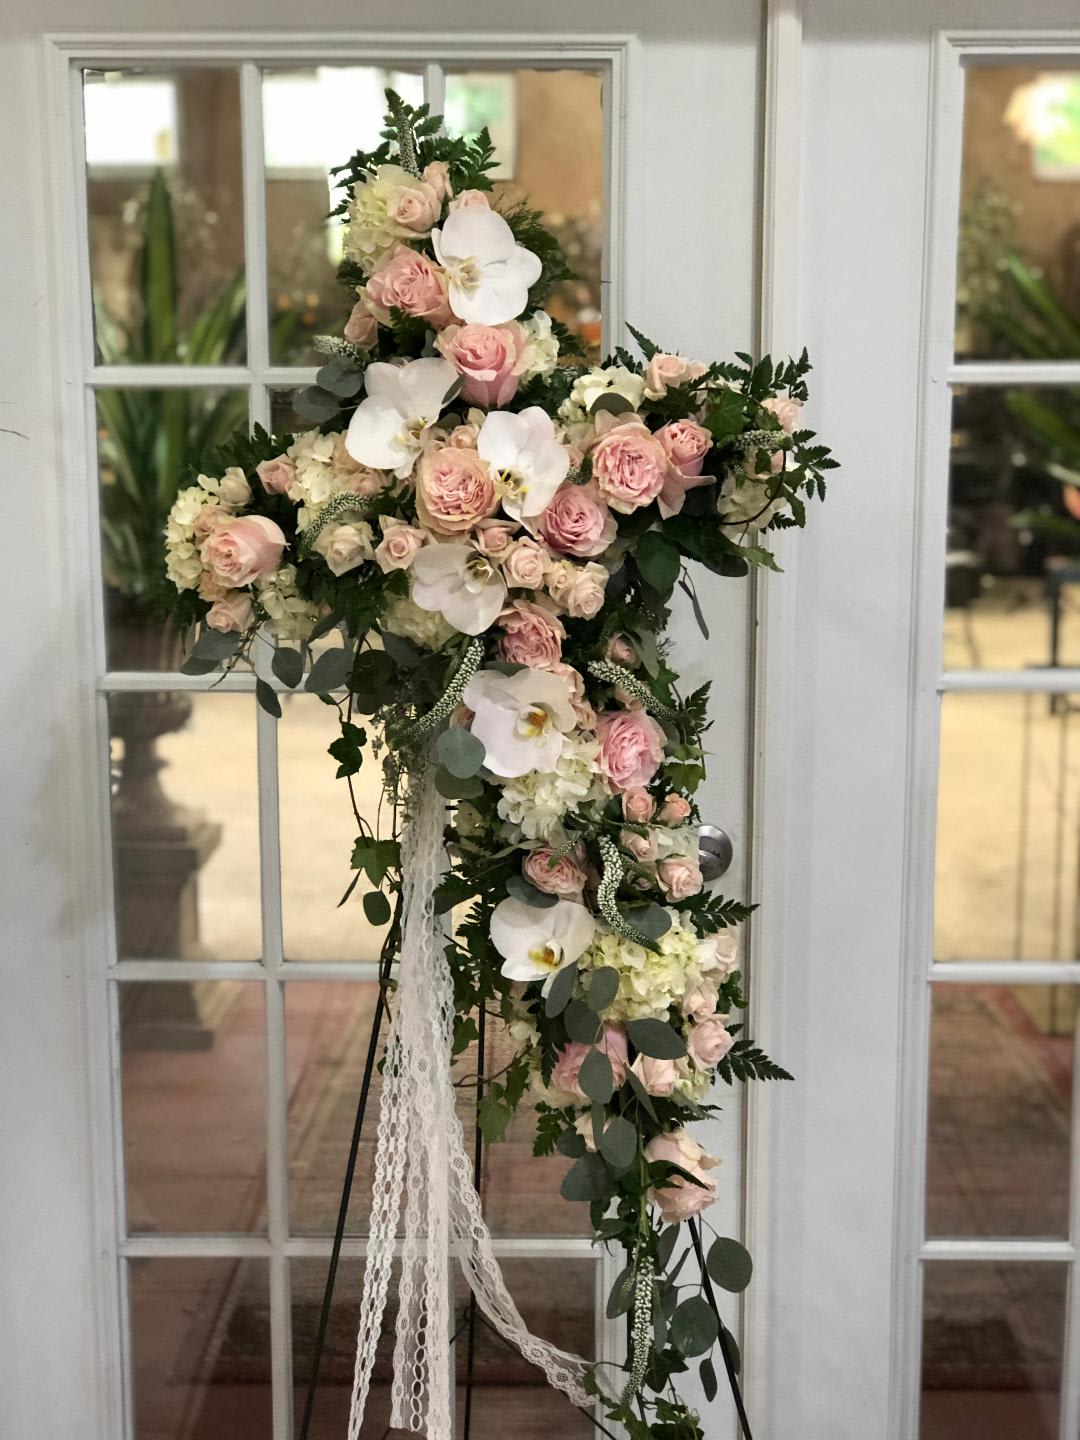 Blessed Memories Cross - This stunning cross of roses, orchids &amp; hydrangea in soft pastel colors makes a touching tribute.